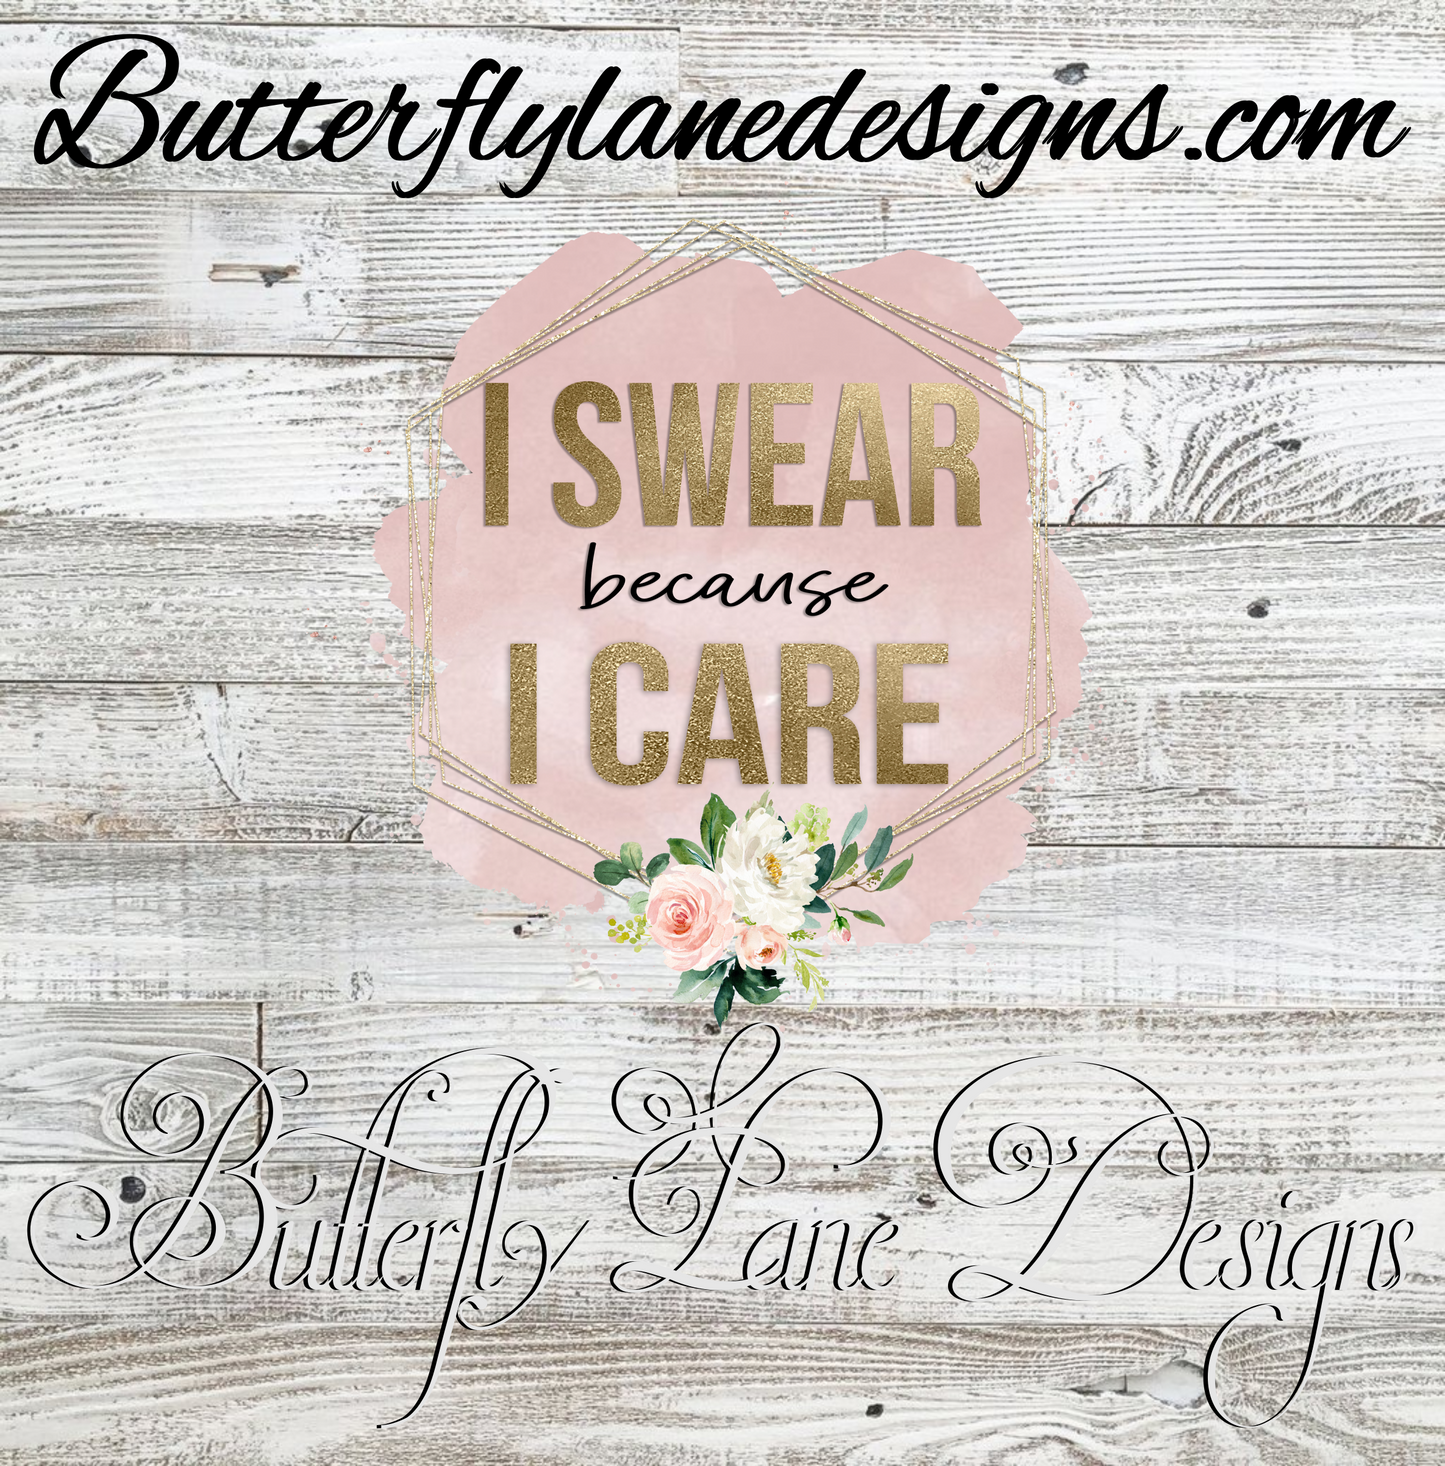 I swear because I care :: Clear Cast Decal